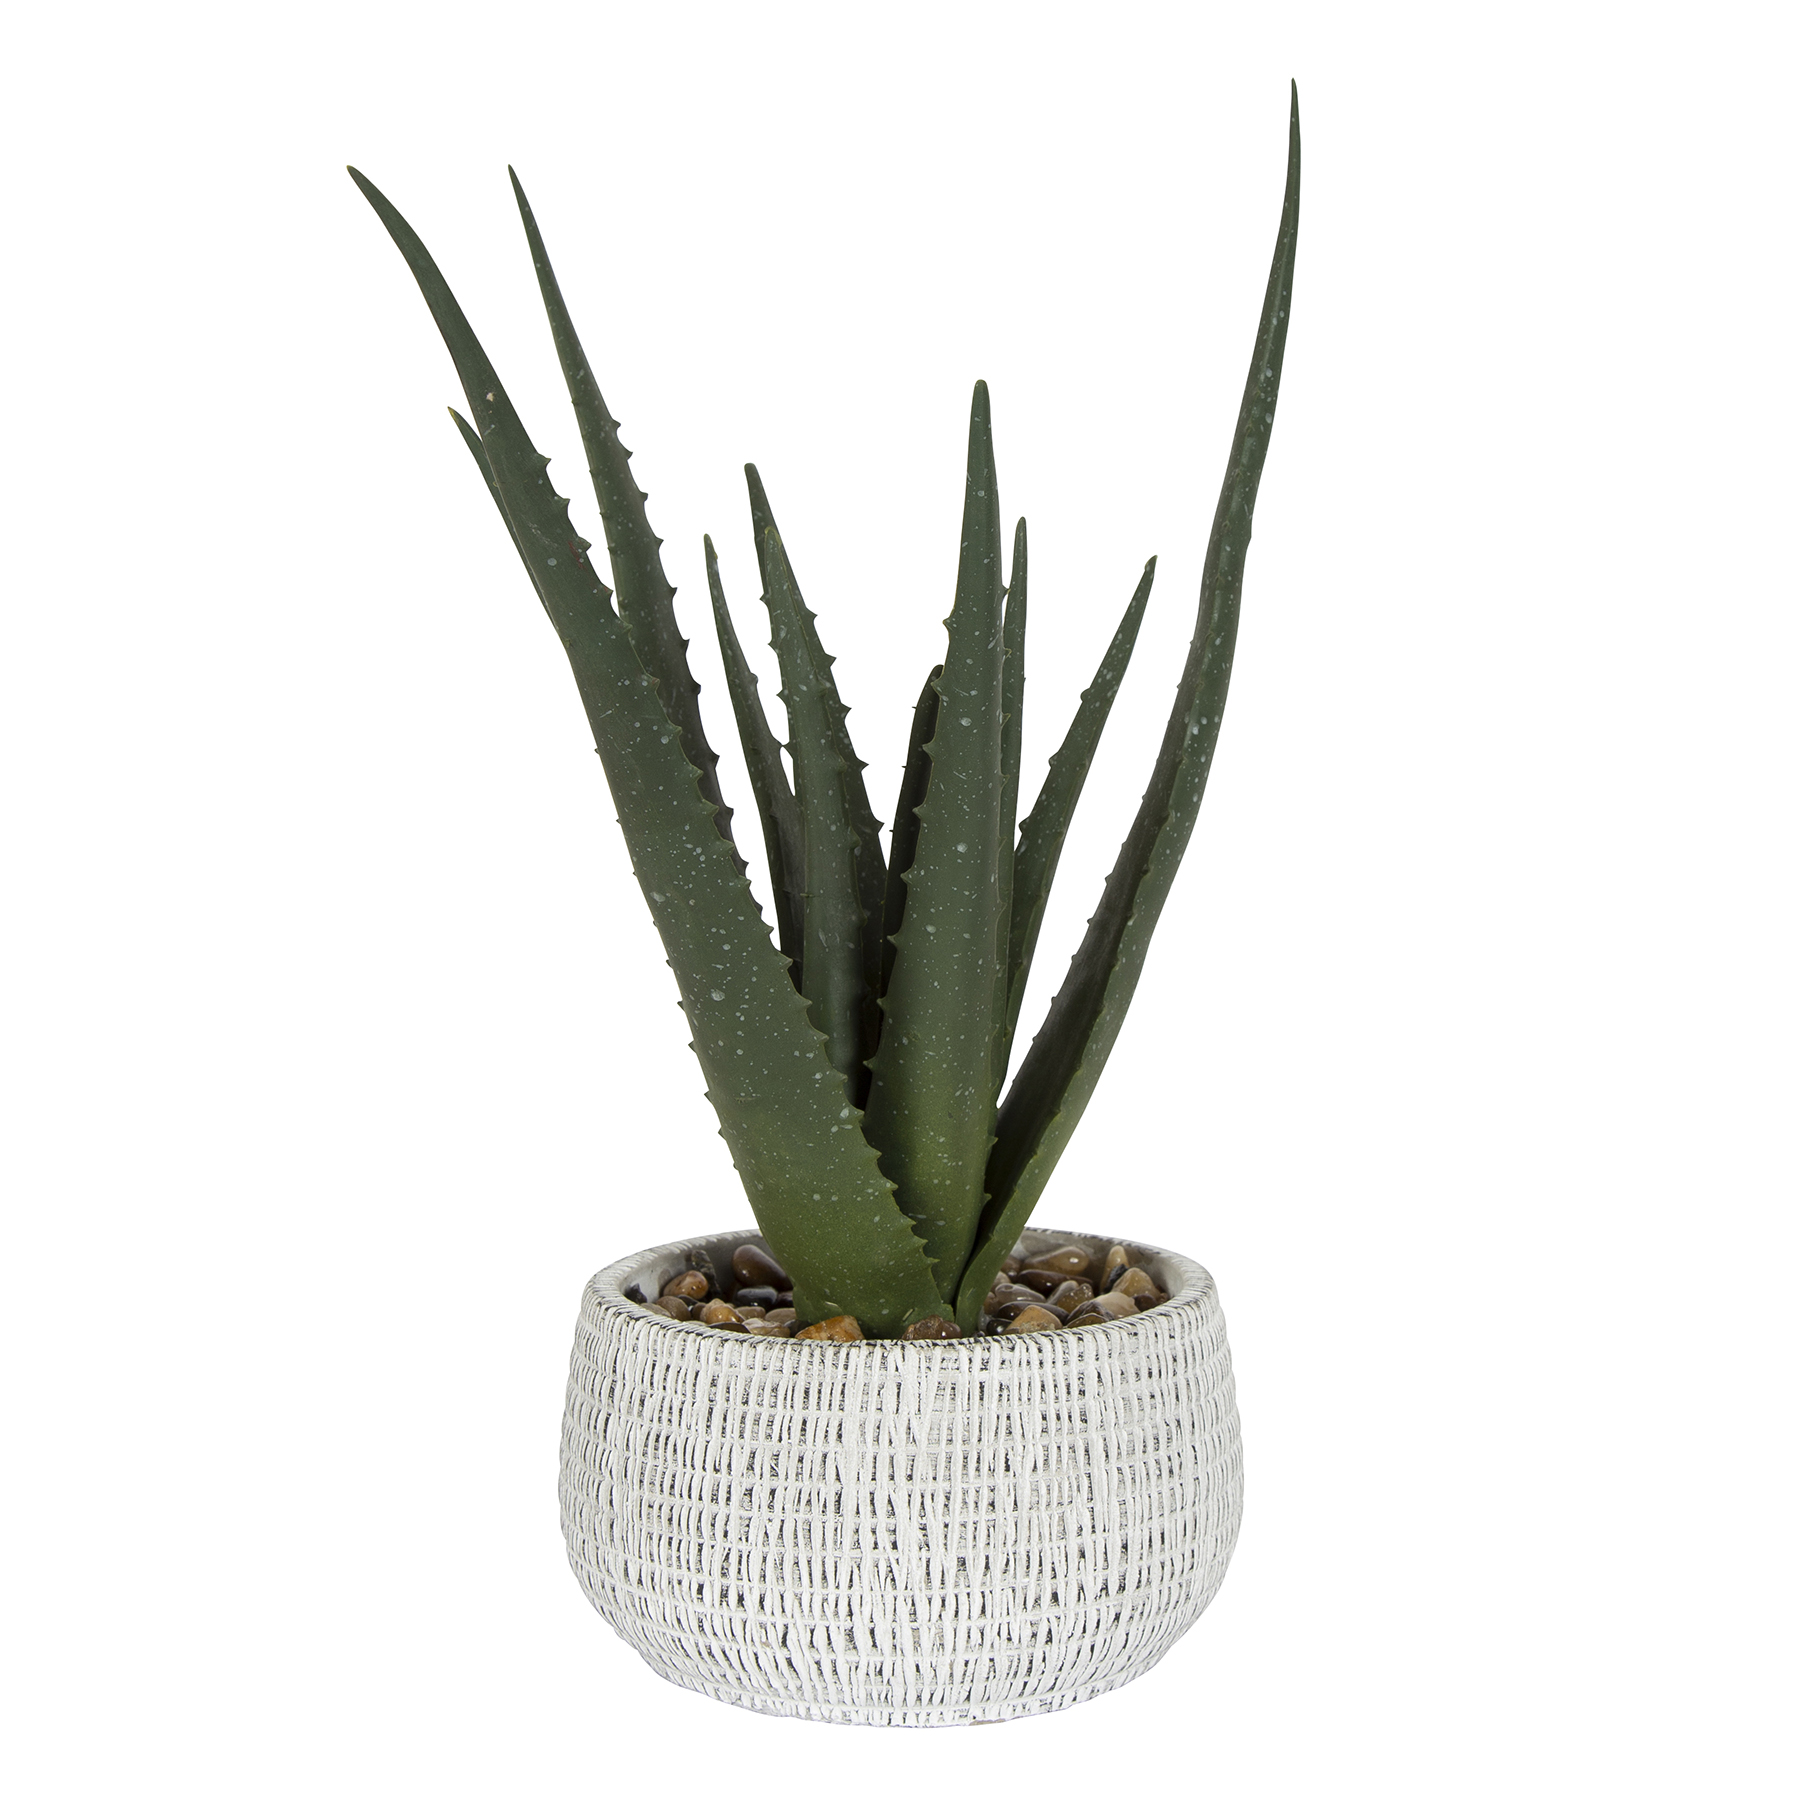 11" Artificial Aloe Plant in White and Black Stone Planter by Better Homes & Gardens - image 1 of 5